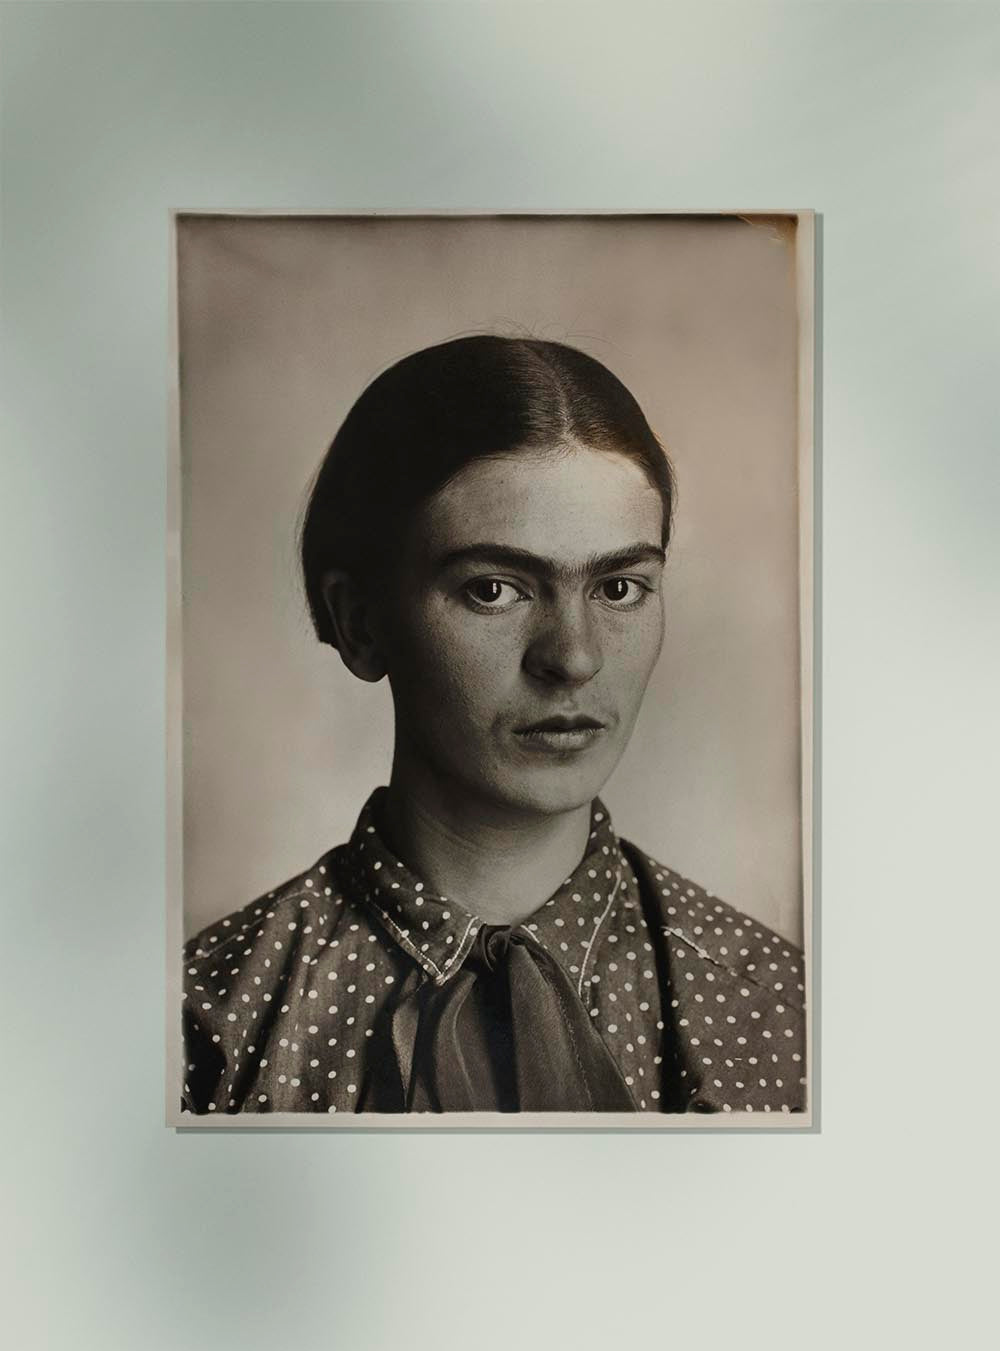 Frida Kahlo Photographic Reproduction by Guilherme